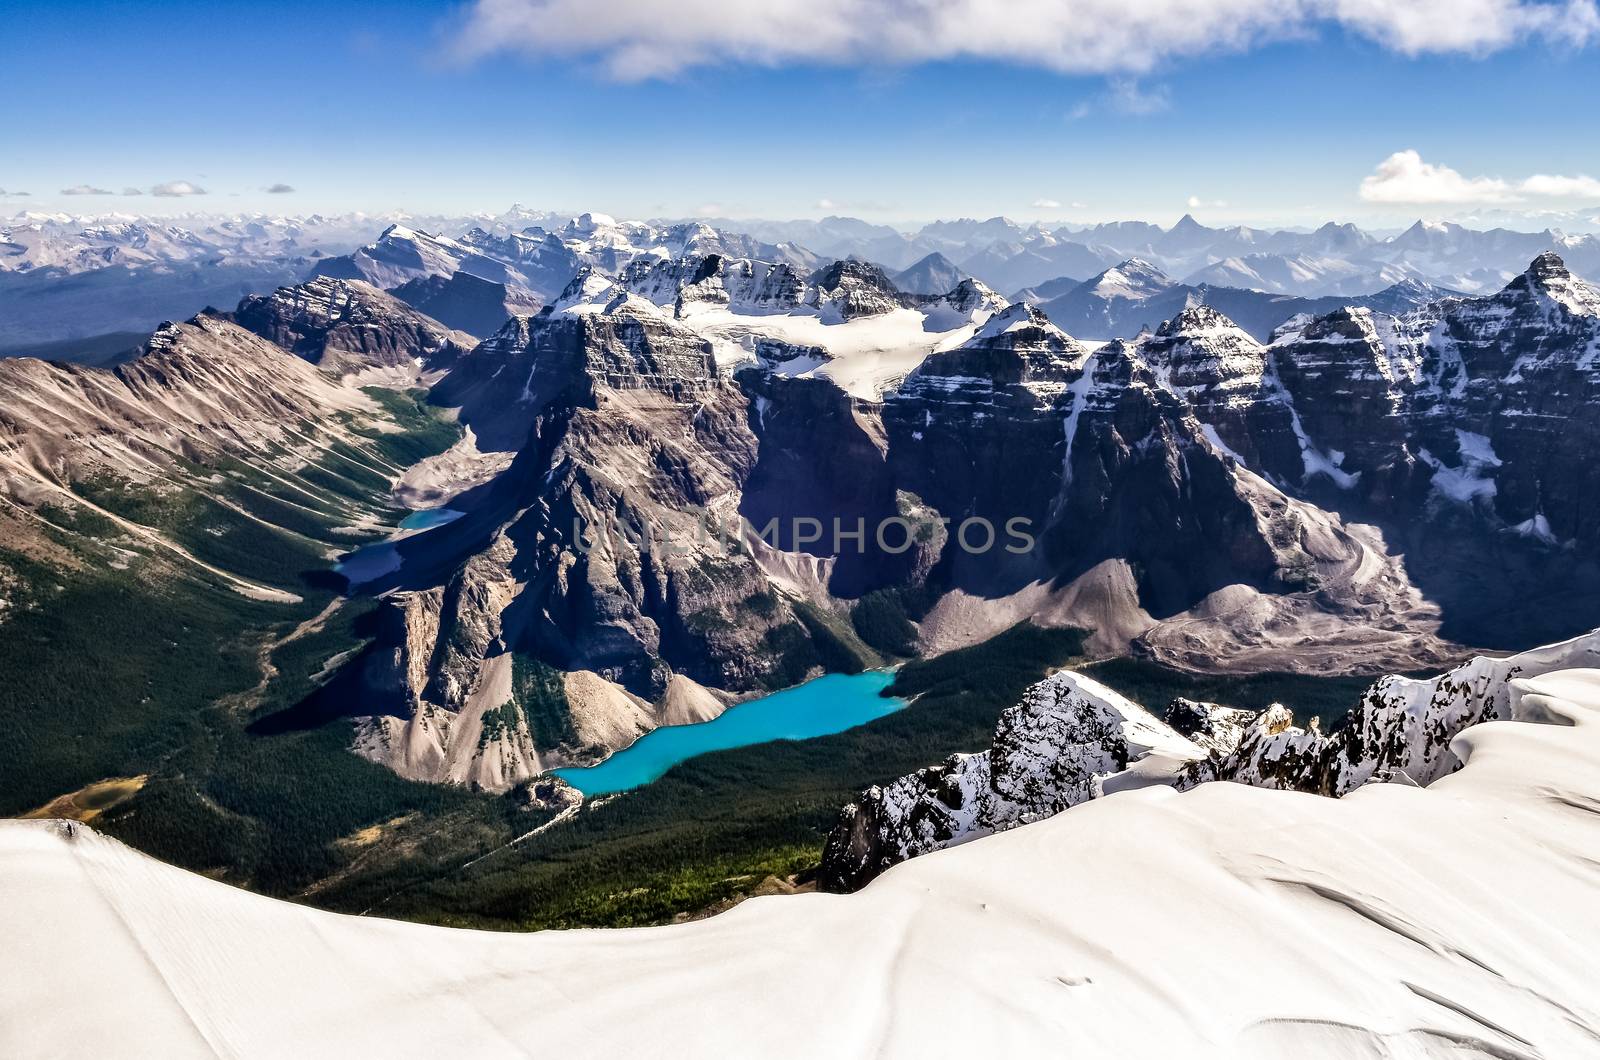 Mountain range view from Mt Temple with Moraine lake, Banff, Rocky Mountains, Alberta, Canada